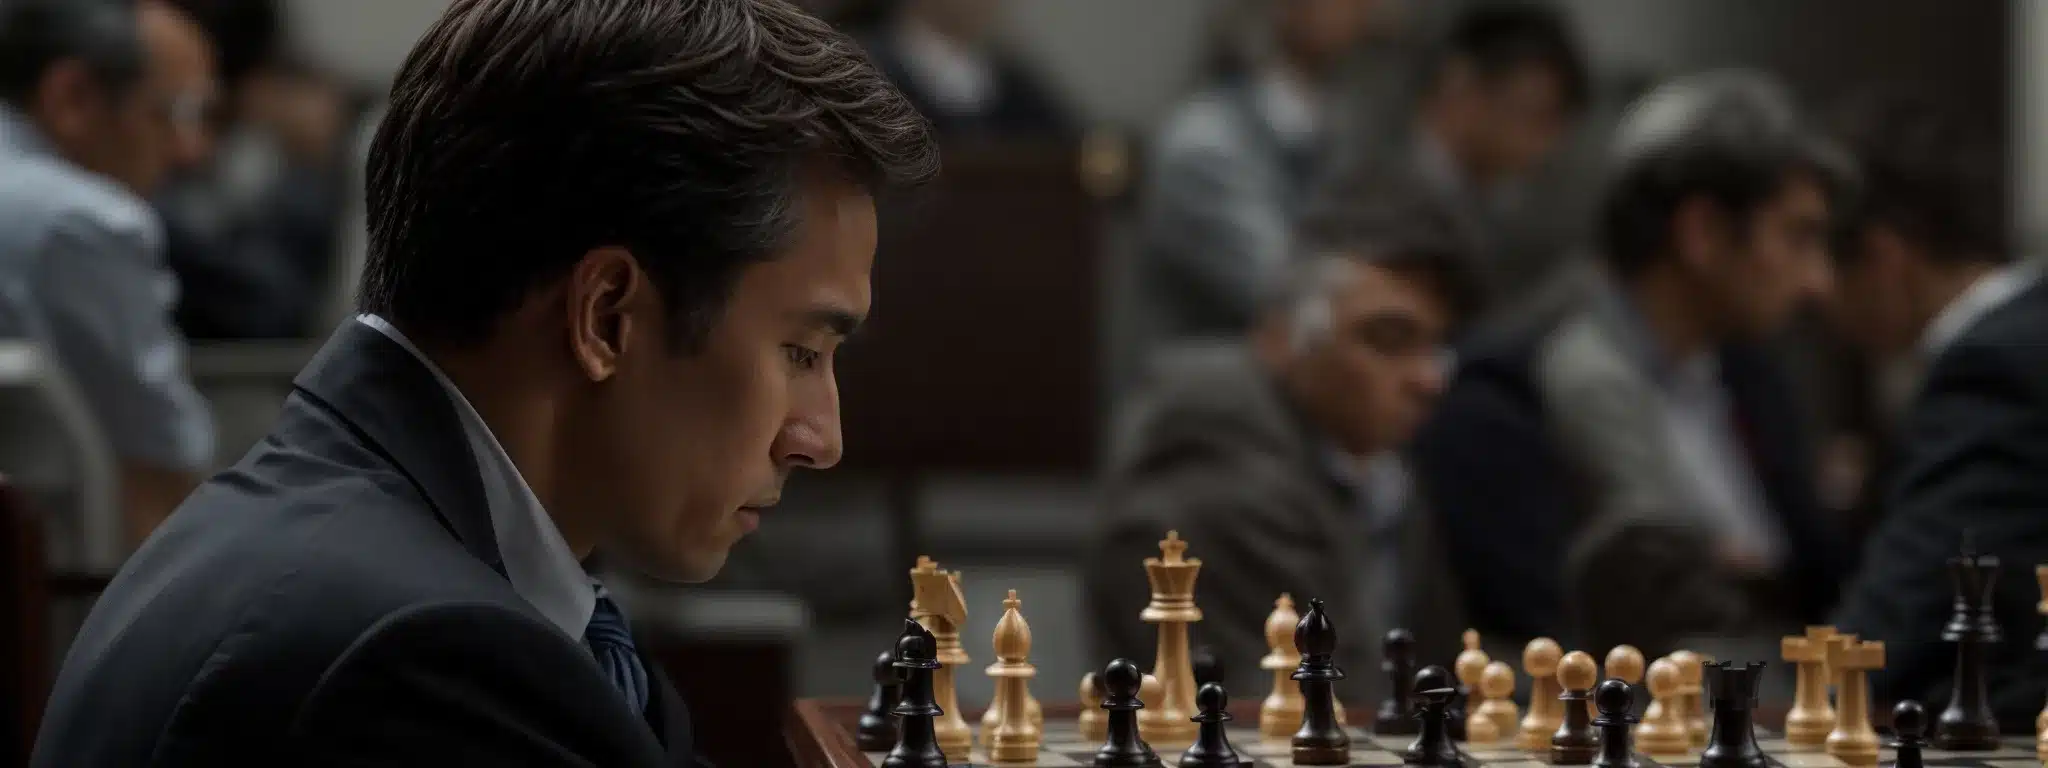 A Chess Grandmaster Ponders Over A Move, With Competitors In The Background Blurred, Evoking Strategic Analysis.